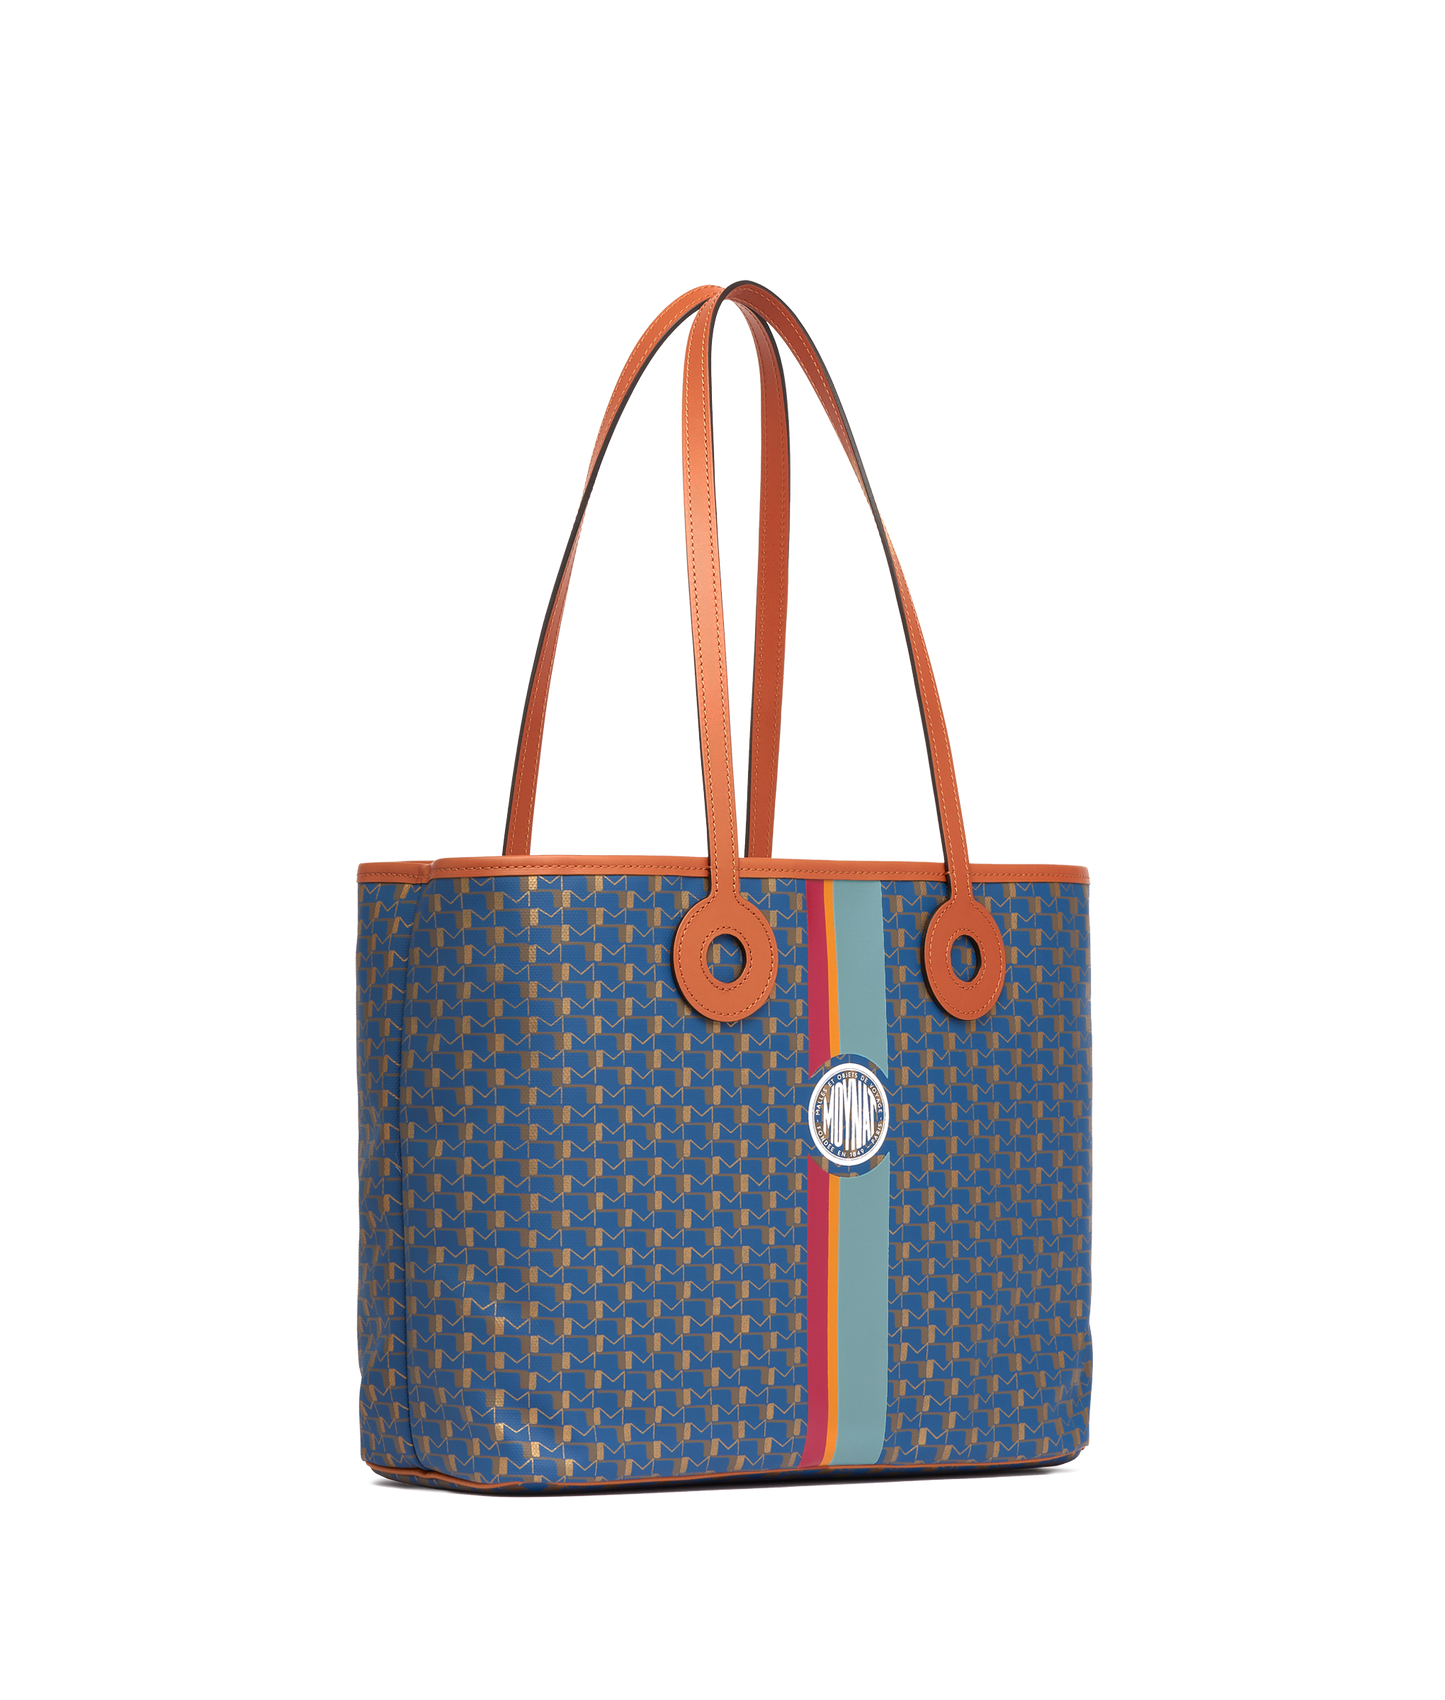 Feel tré chic and effortless with this Moynat Ruban Duo MM Indigo Bronze  Cognac Tote Bag. Grab this piece of Parisian luxury only at…